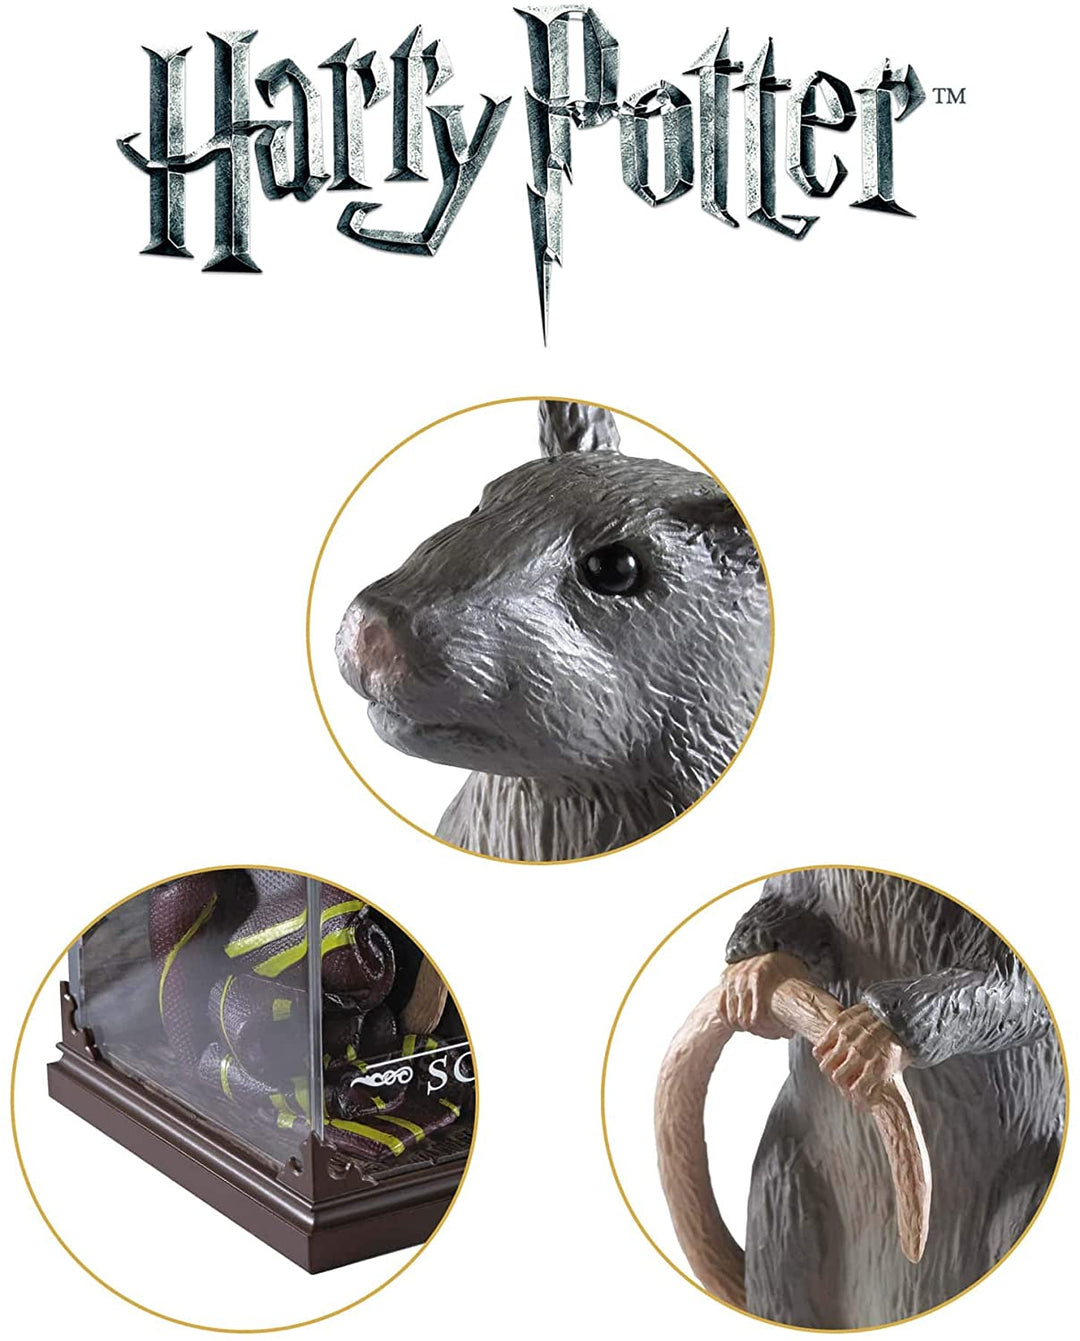 Wizarding World Collection : Magical Creatures – Scabbers